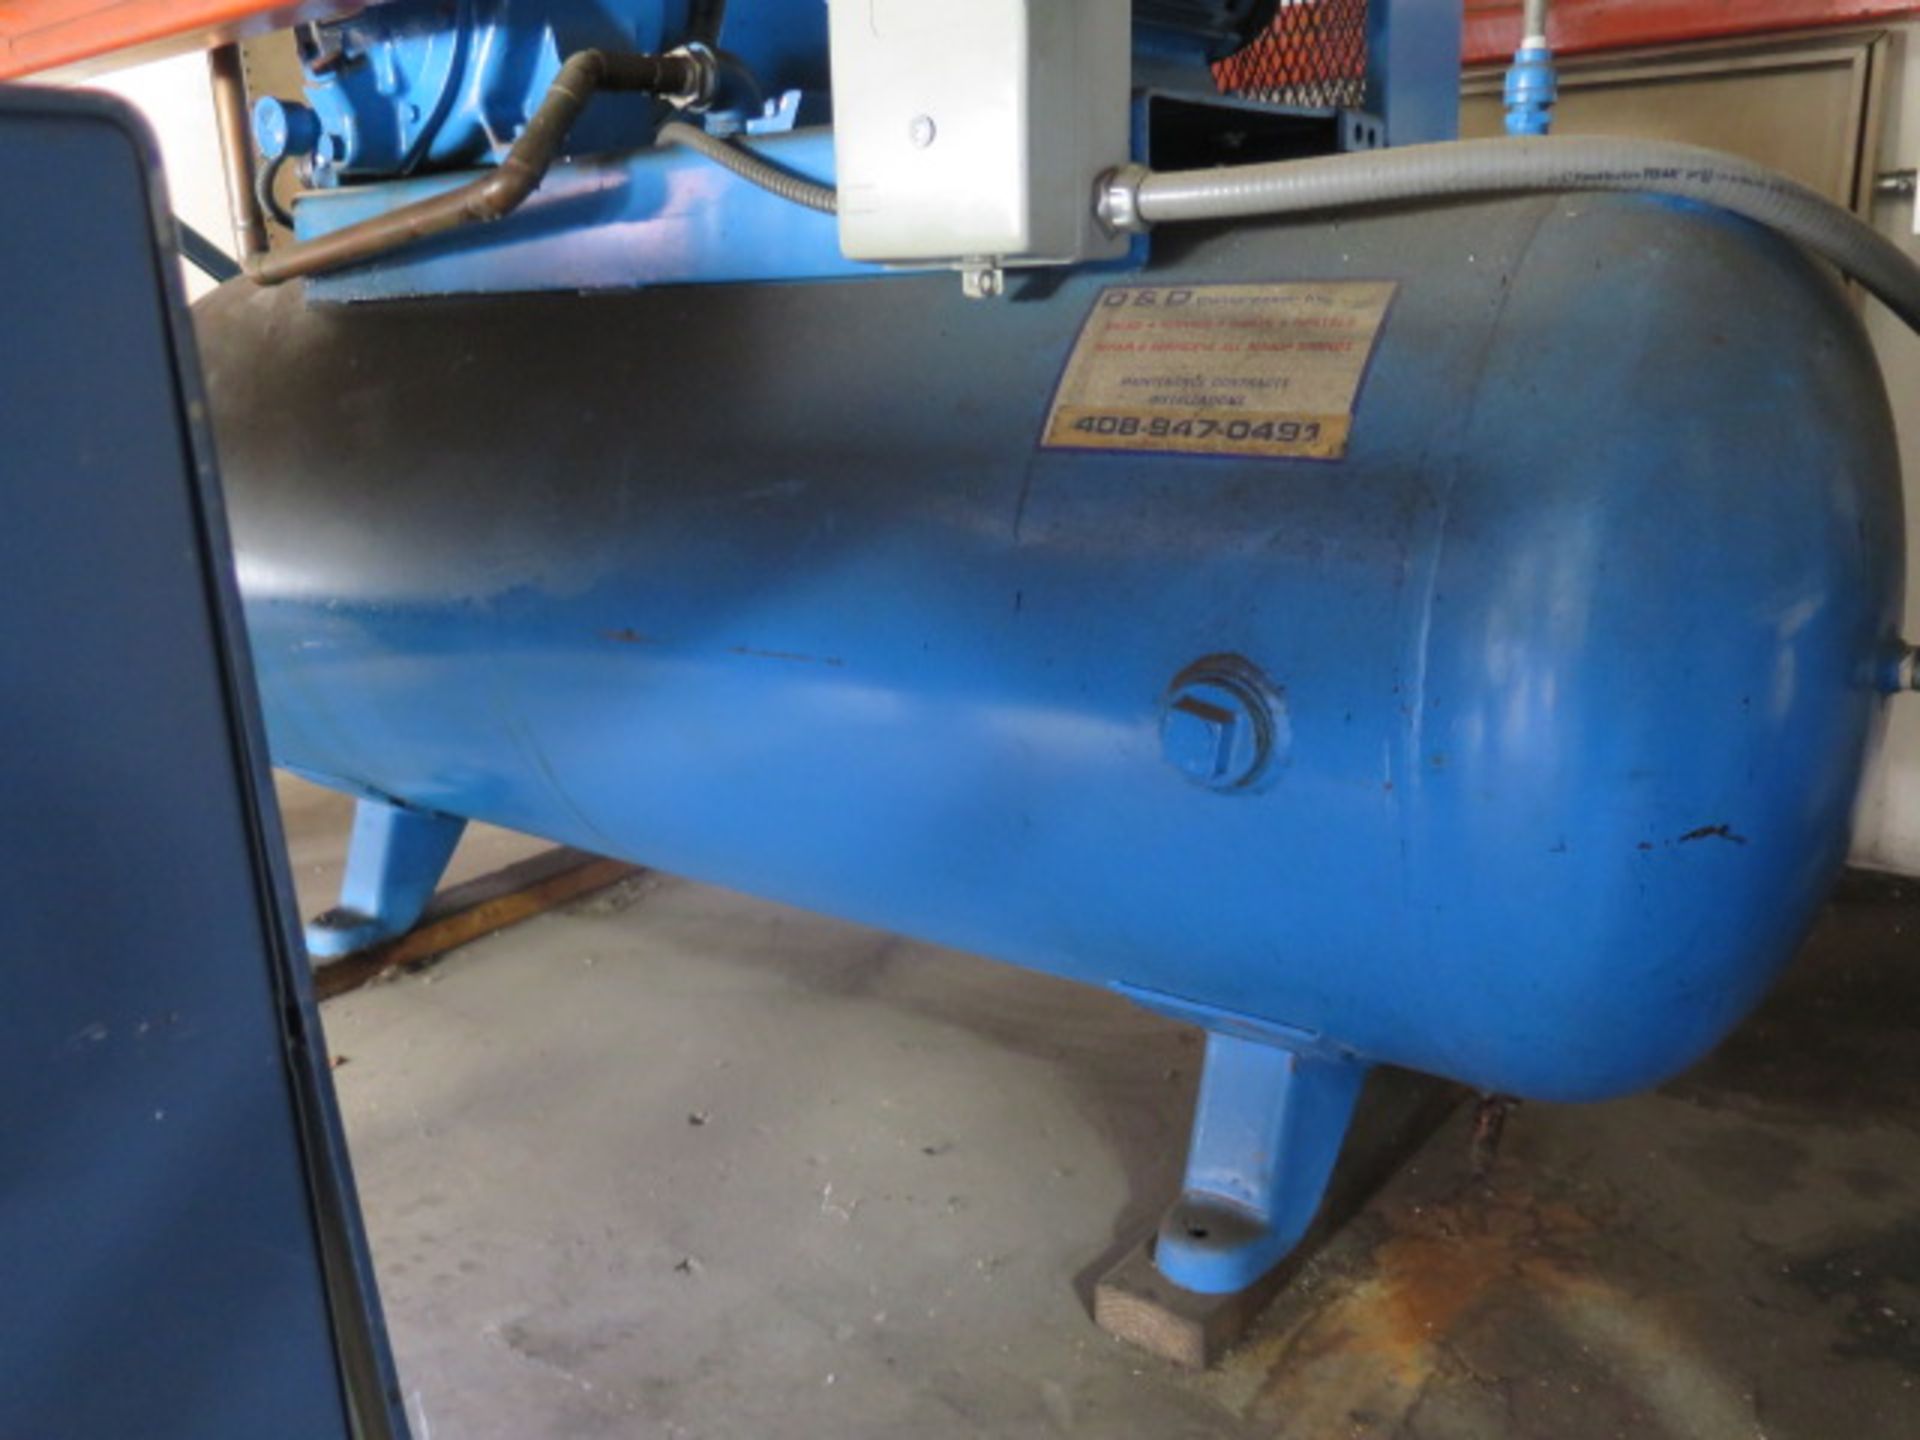 7.5Hp Horizontal Air Compressor w/ 2-Stage Pump, 120 Gallon Tankj (SOLD AS-IS - NO WARRANTY) - Image 4 of 5